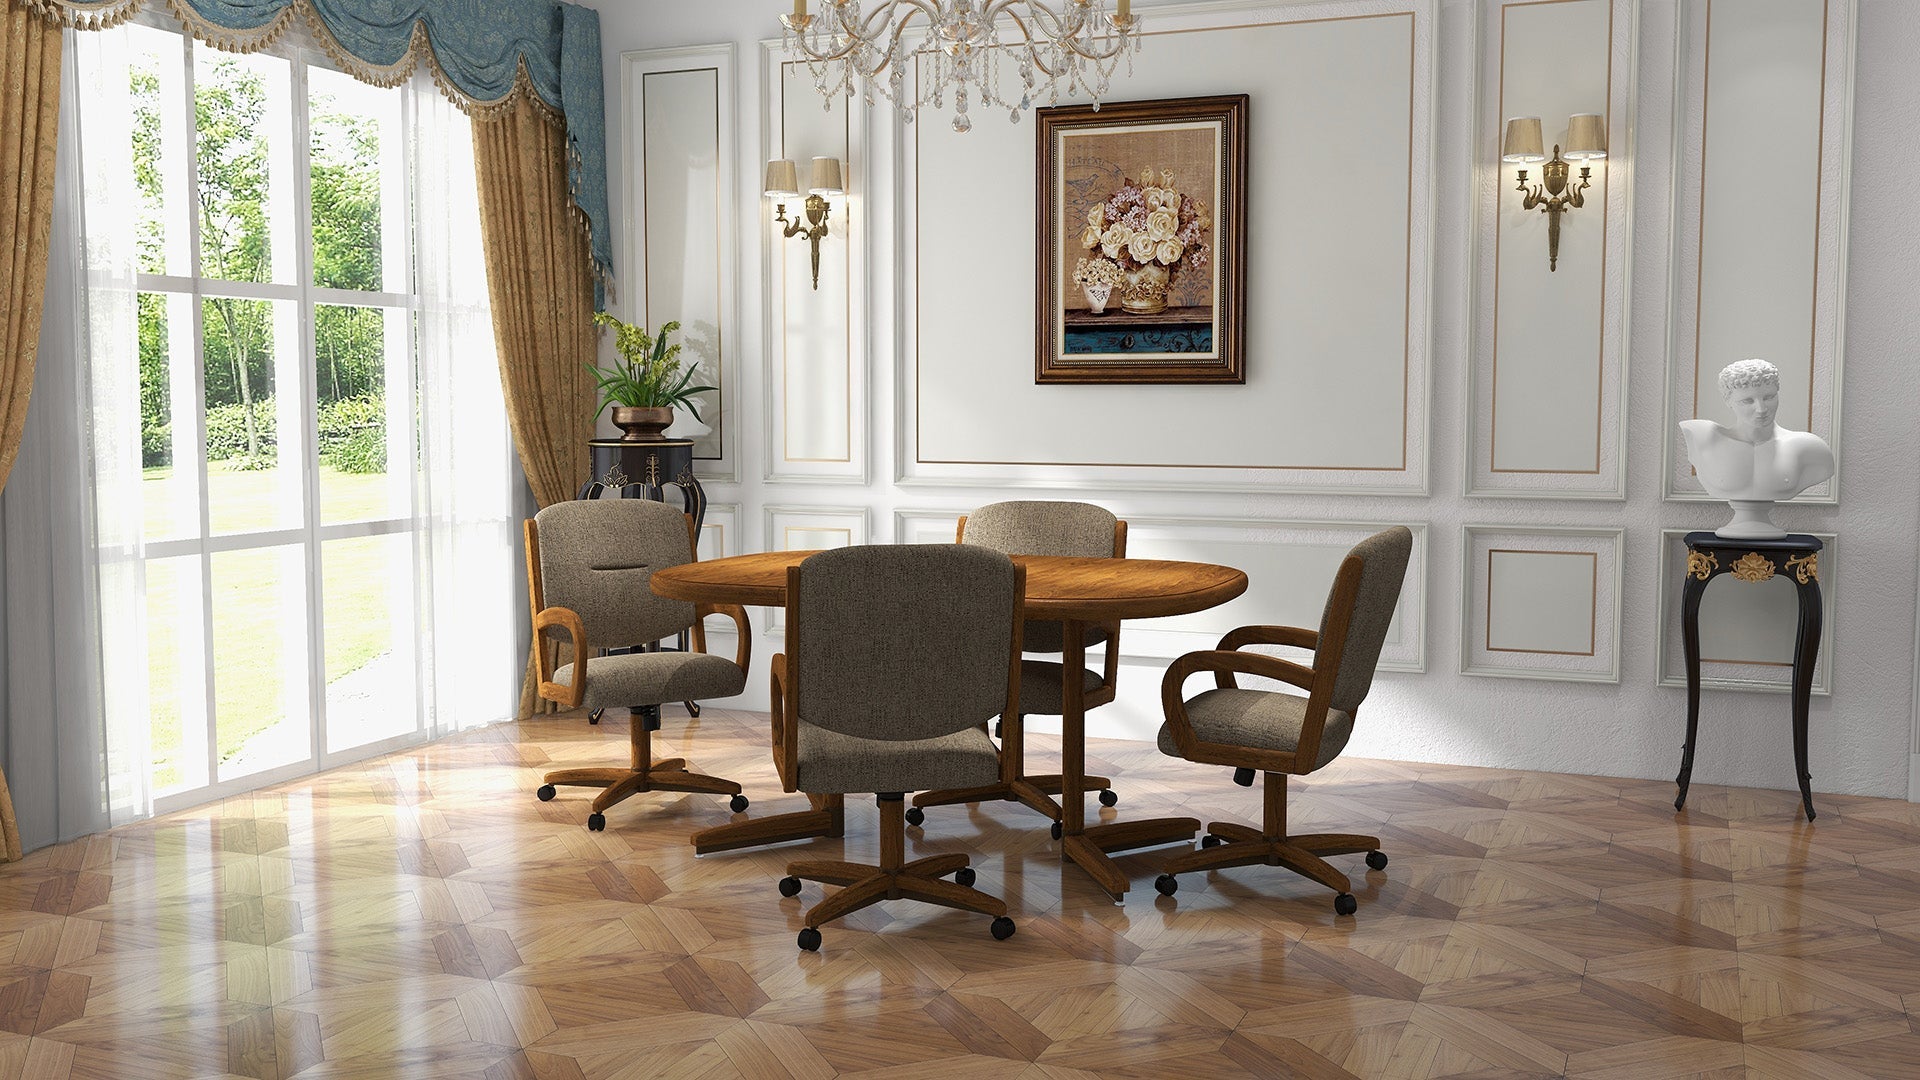 Chromcraft Concord Collection CM176-C946: A Timeless Centerpiece For Your Dining Space